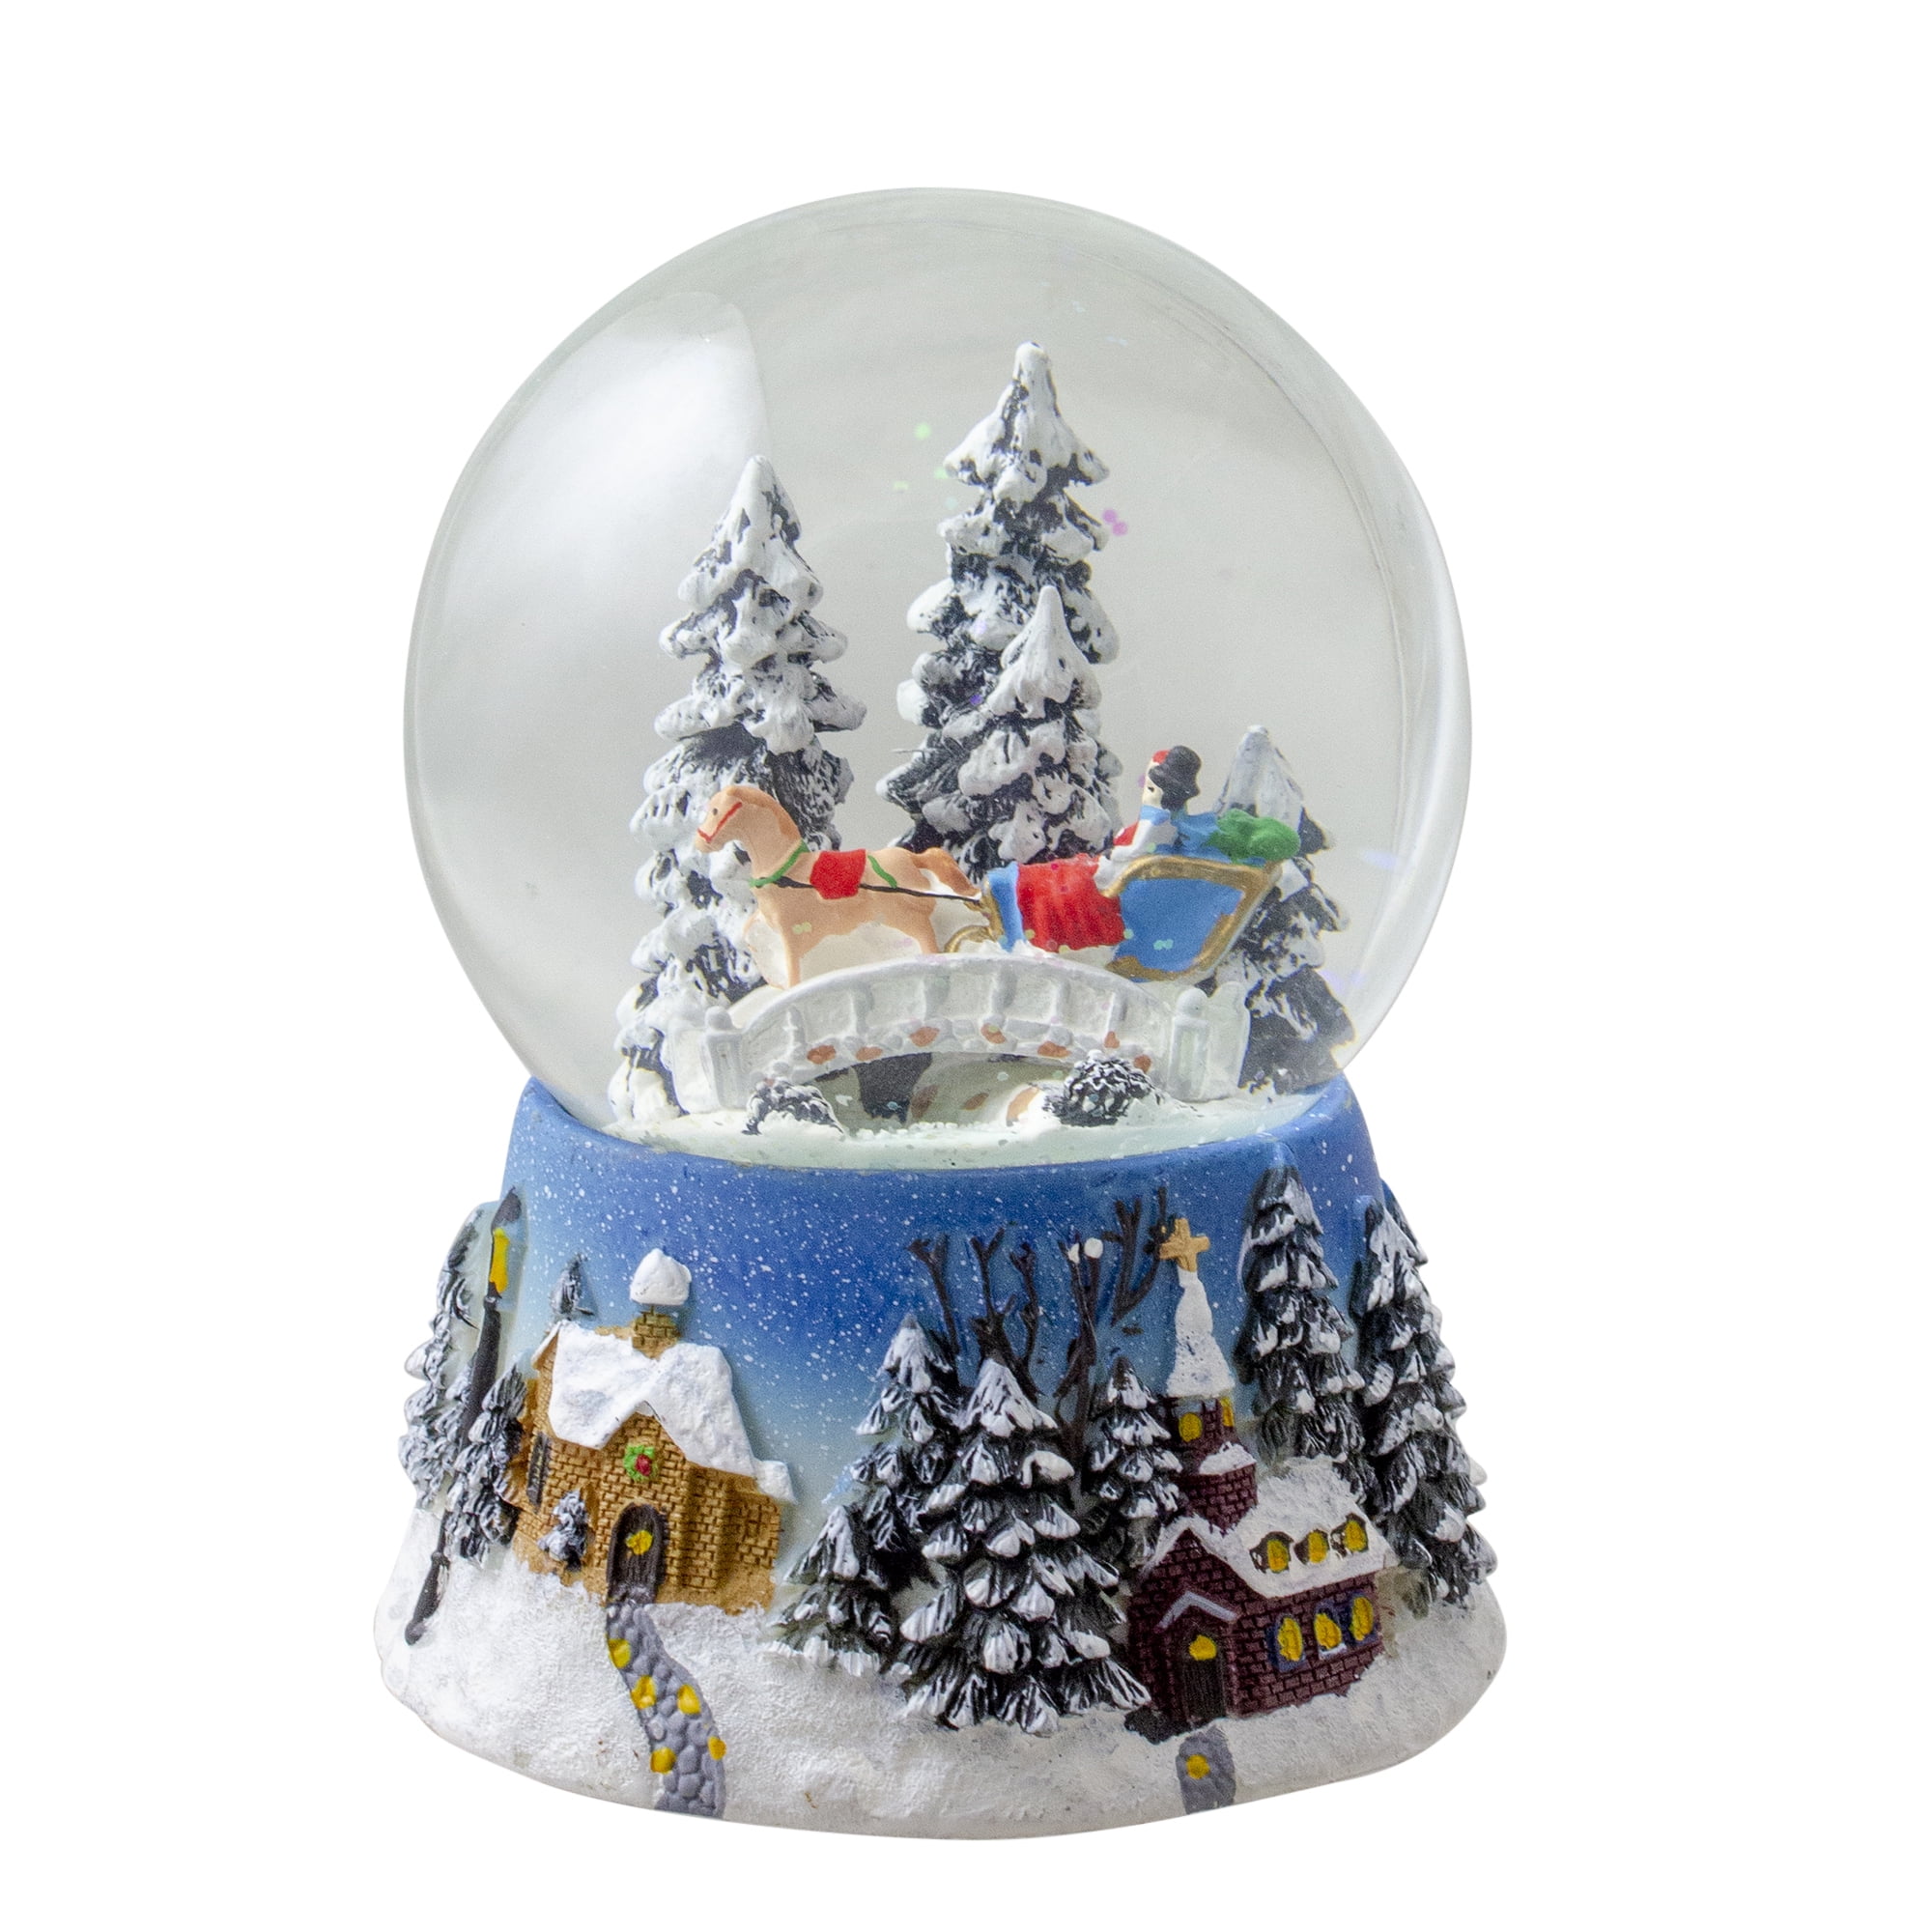 6 Musical Winter Forest Sleigh Ride Christmas Snow Globe Tabletop ...